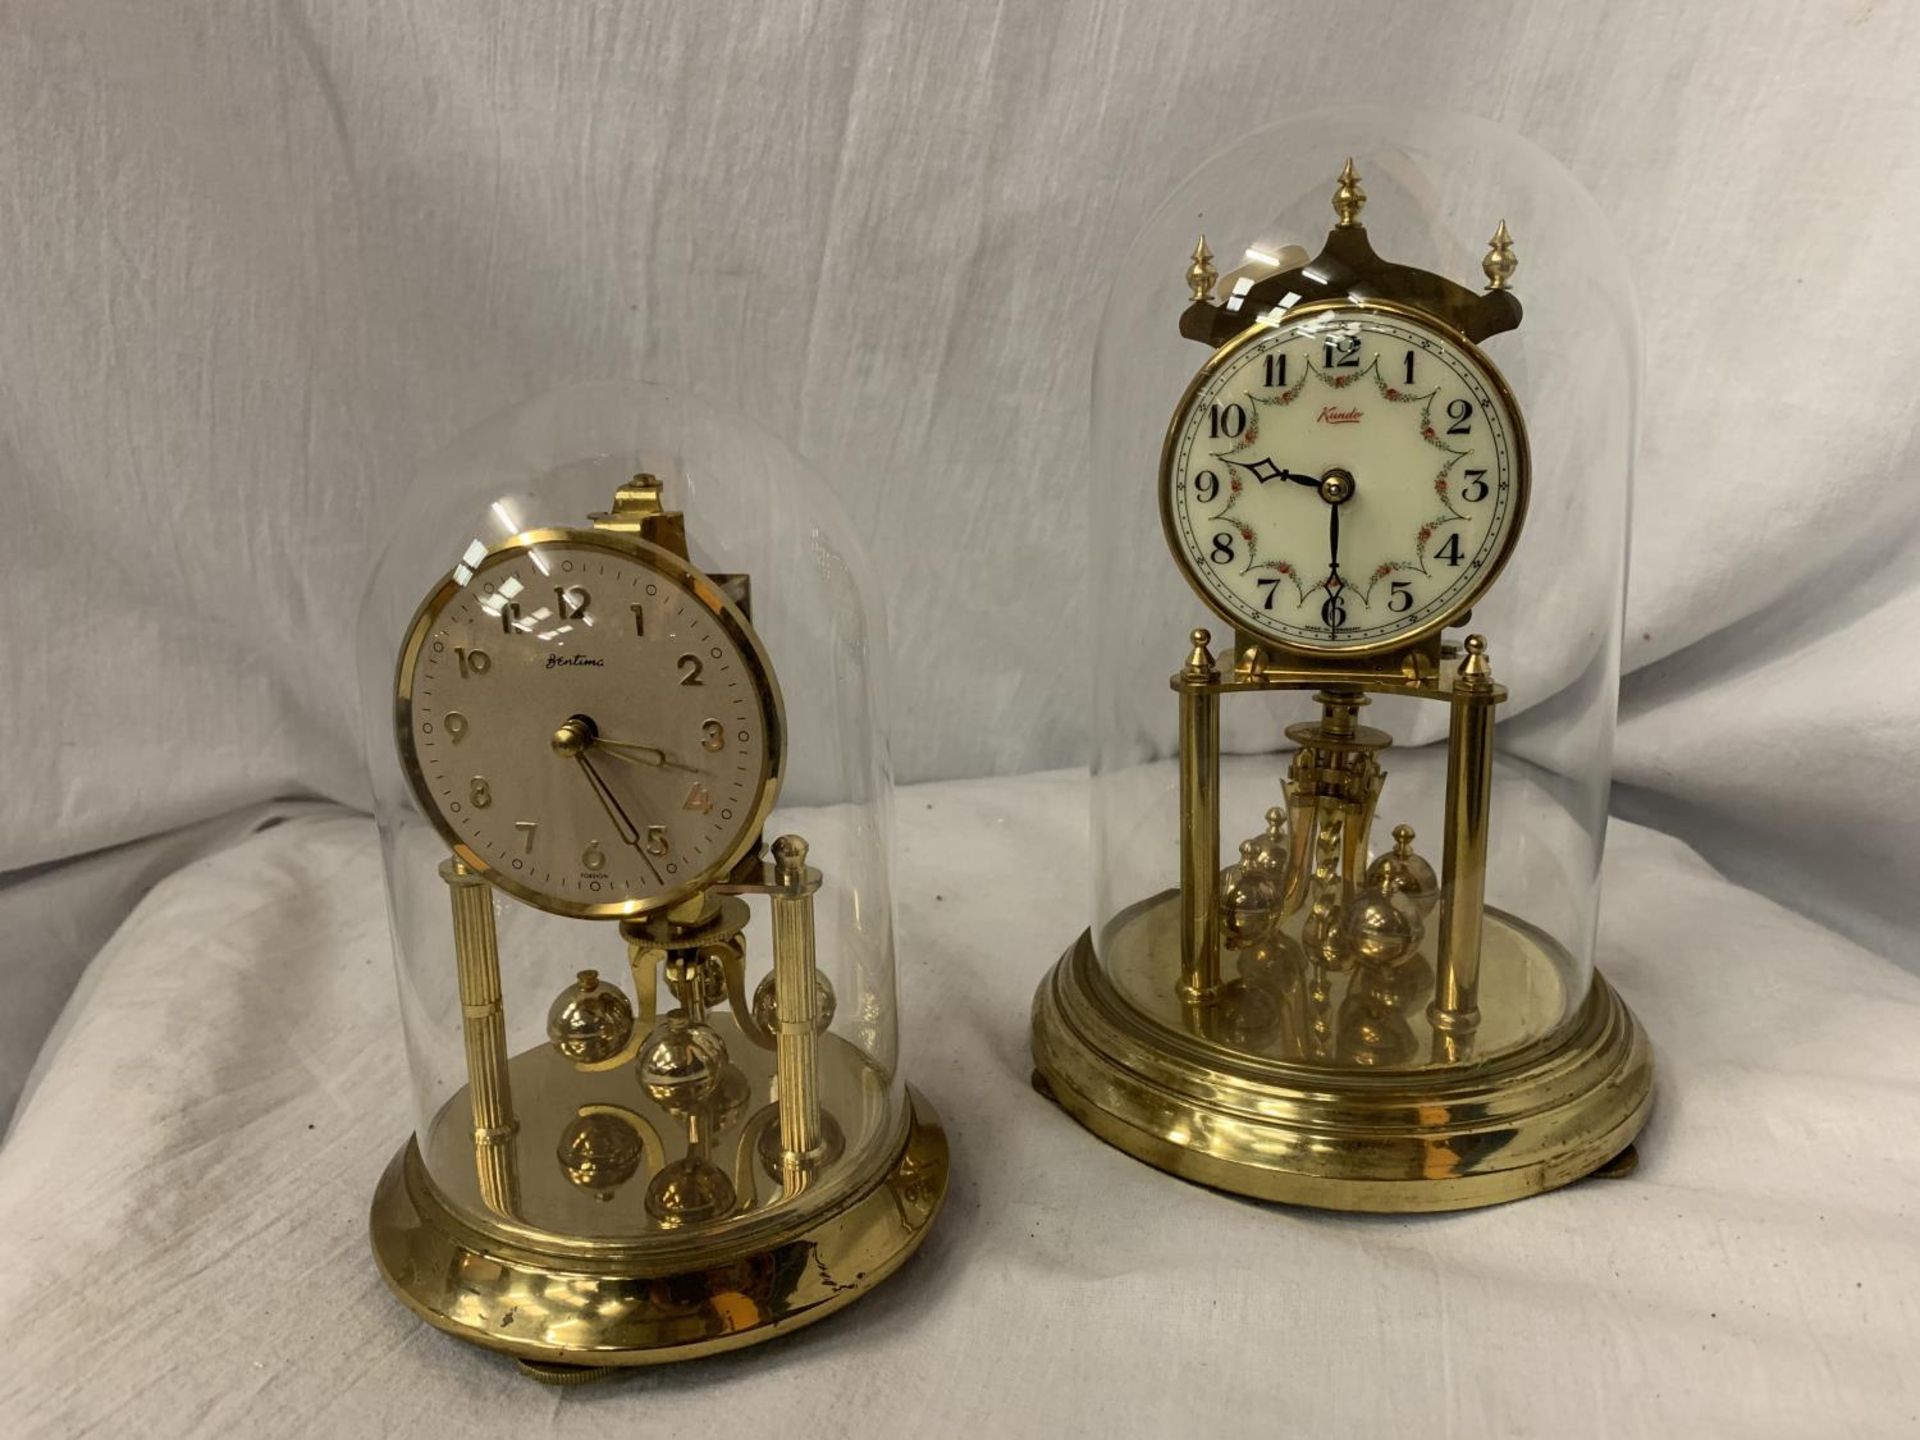 A KUNDO ANNIVERSARY GLASS DOMED CLOCK H: 9" AND A BENTIMA GLASS DOMED CLOCK